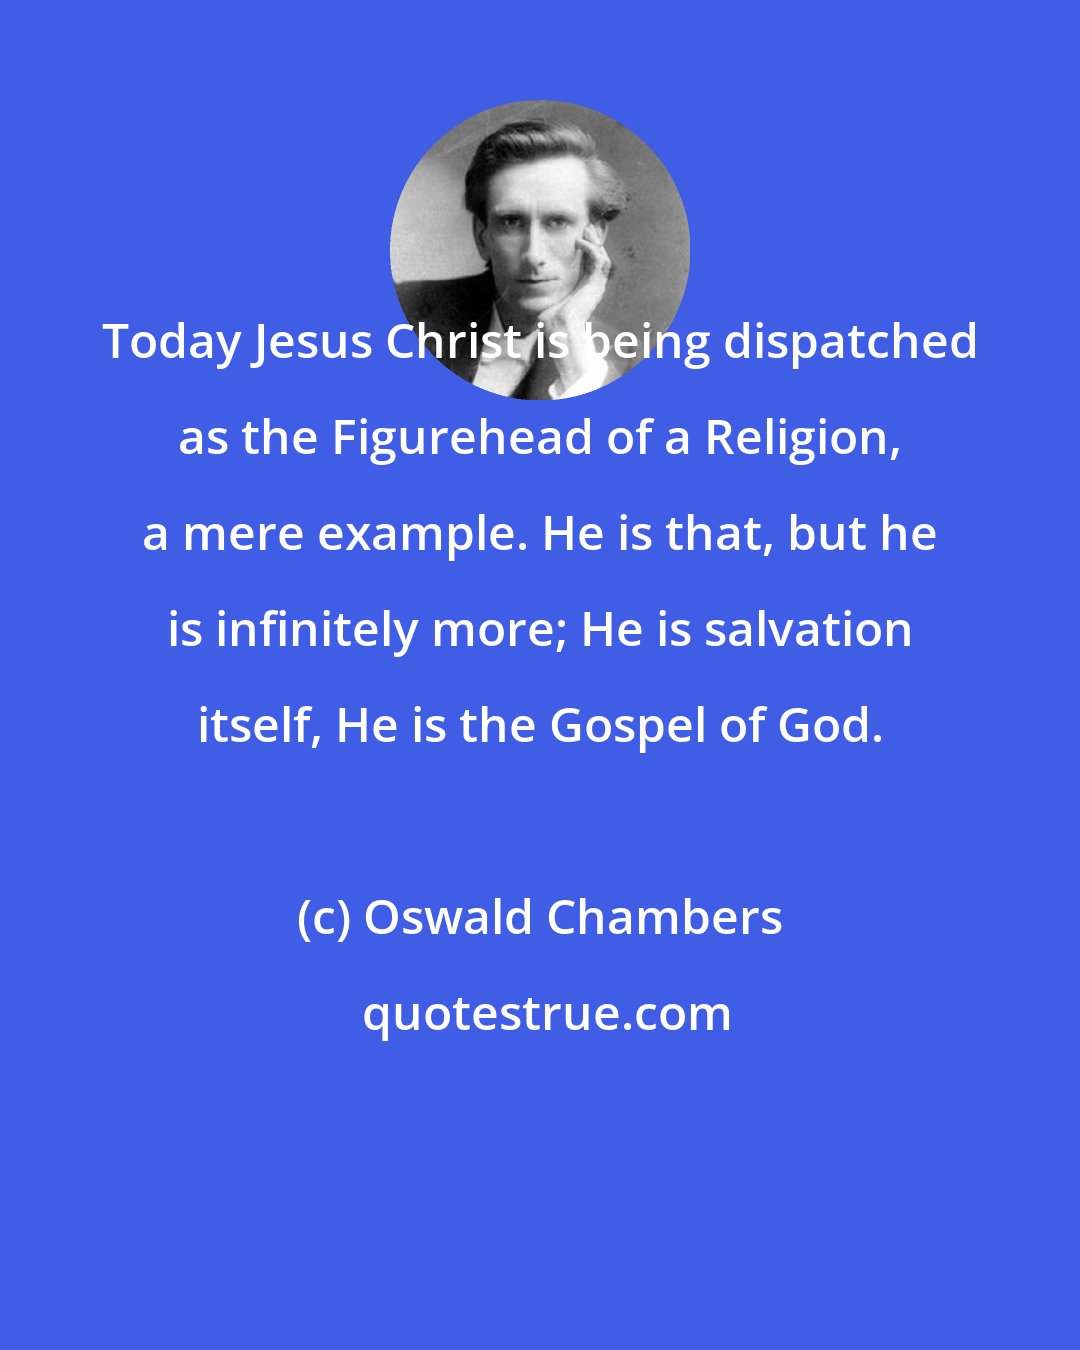 Oswald Chambers: Today Jesus Christ is being dispatched as the Figurehead of a Religion, a mere example. He is that, but he is infinitely more; He is salvation itself, He is the Gospel of God.